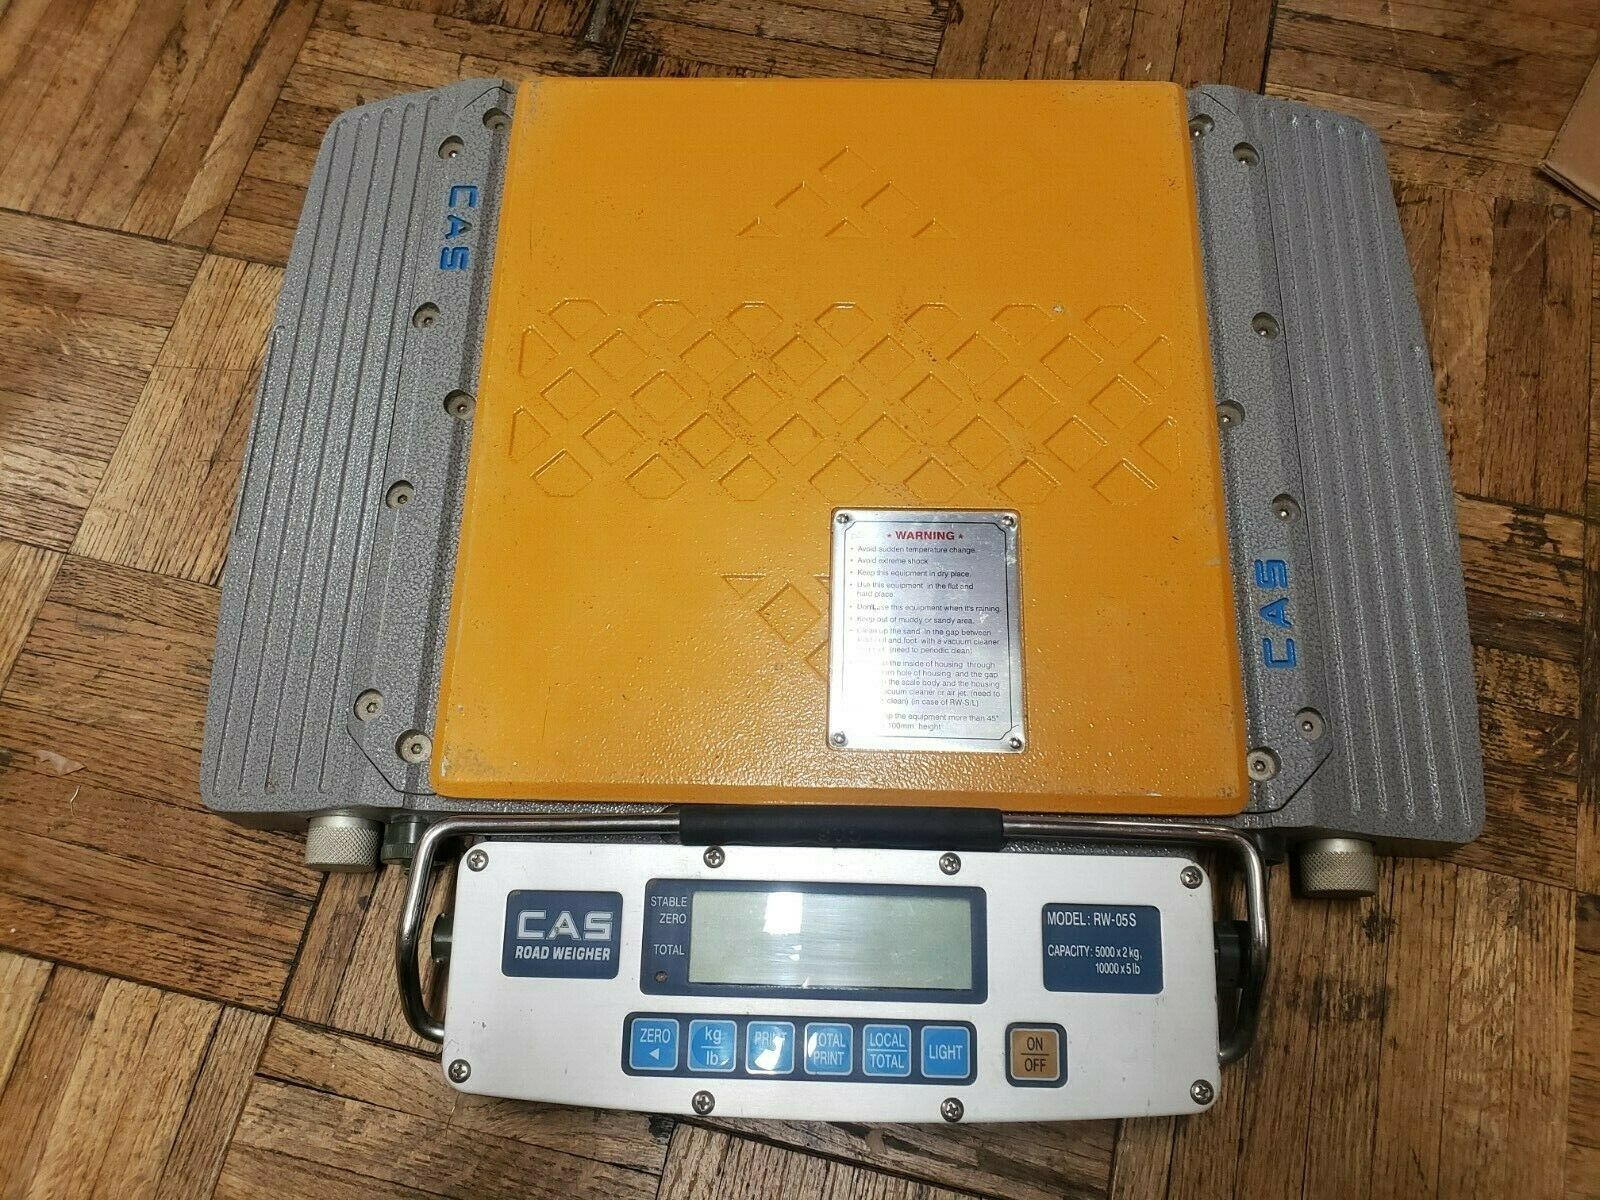 Cas Rw-05s Road Weigher Weighing Scale 5000x2kg, 10000 X 5lb